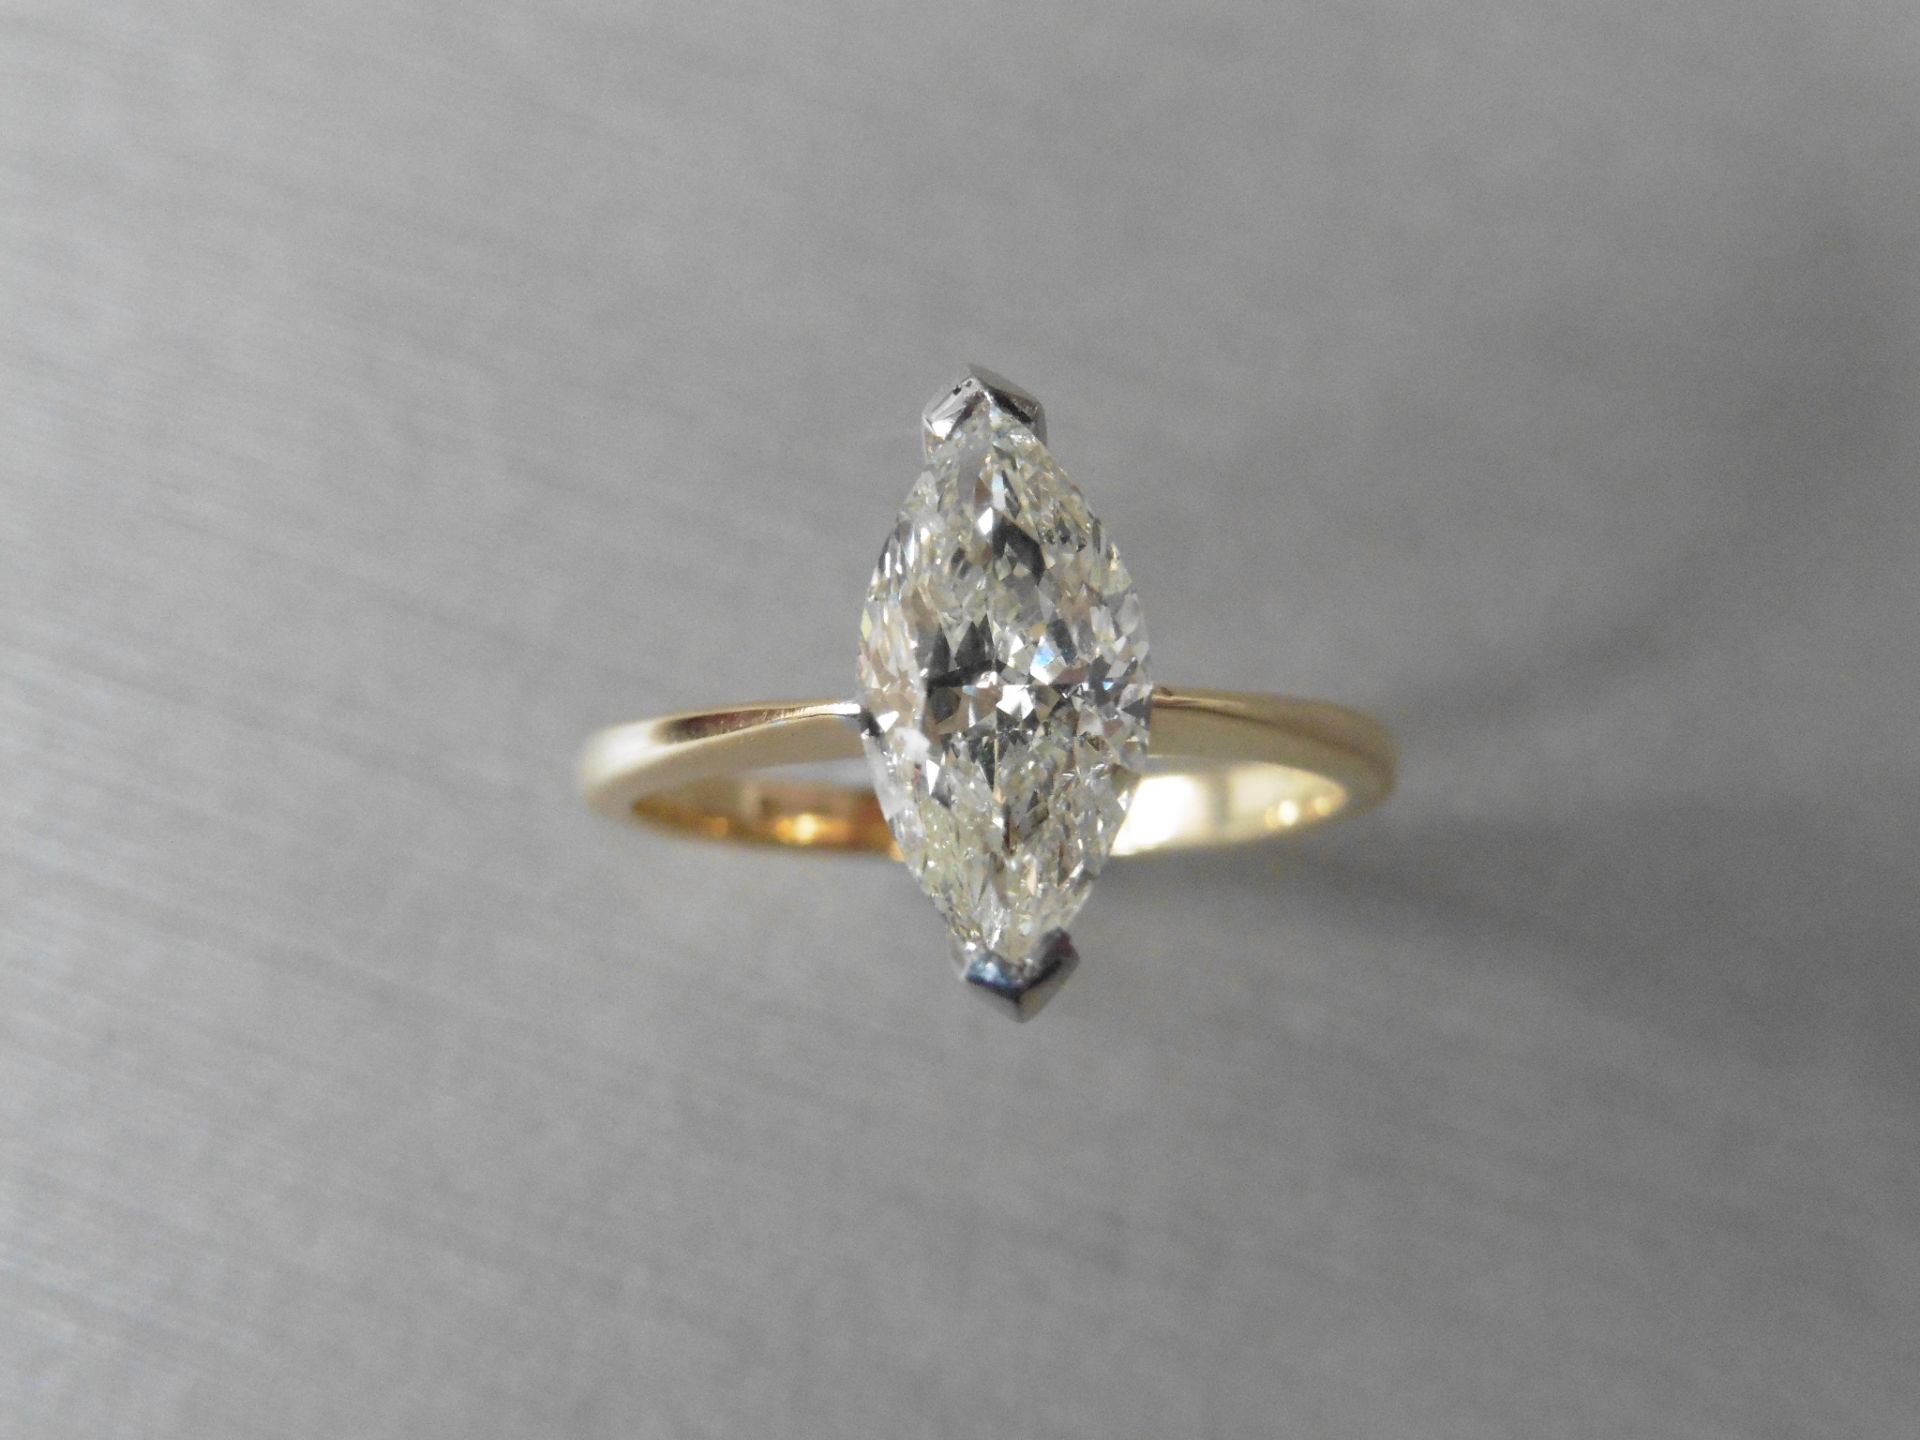 1.51ct marquise cut diamond ring. H colour and Si2 clarity. Secured in a 2 claw white gold setting - Image 5 of 7